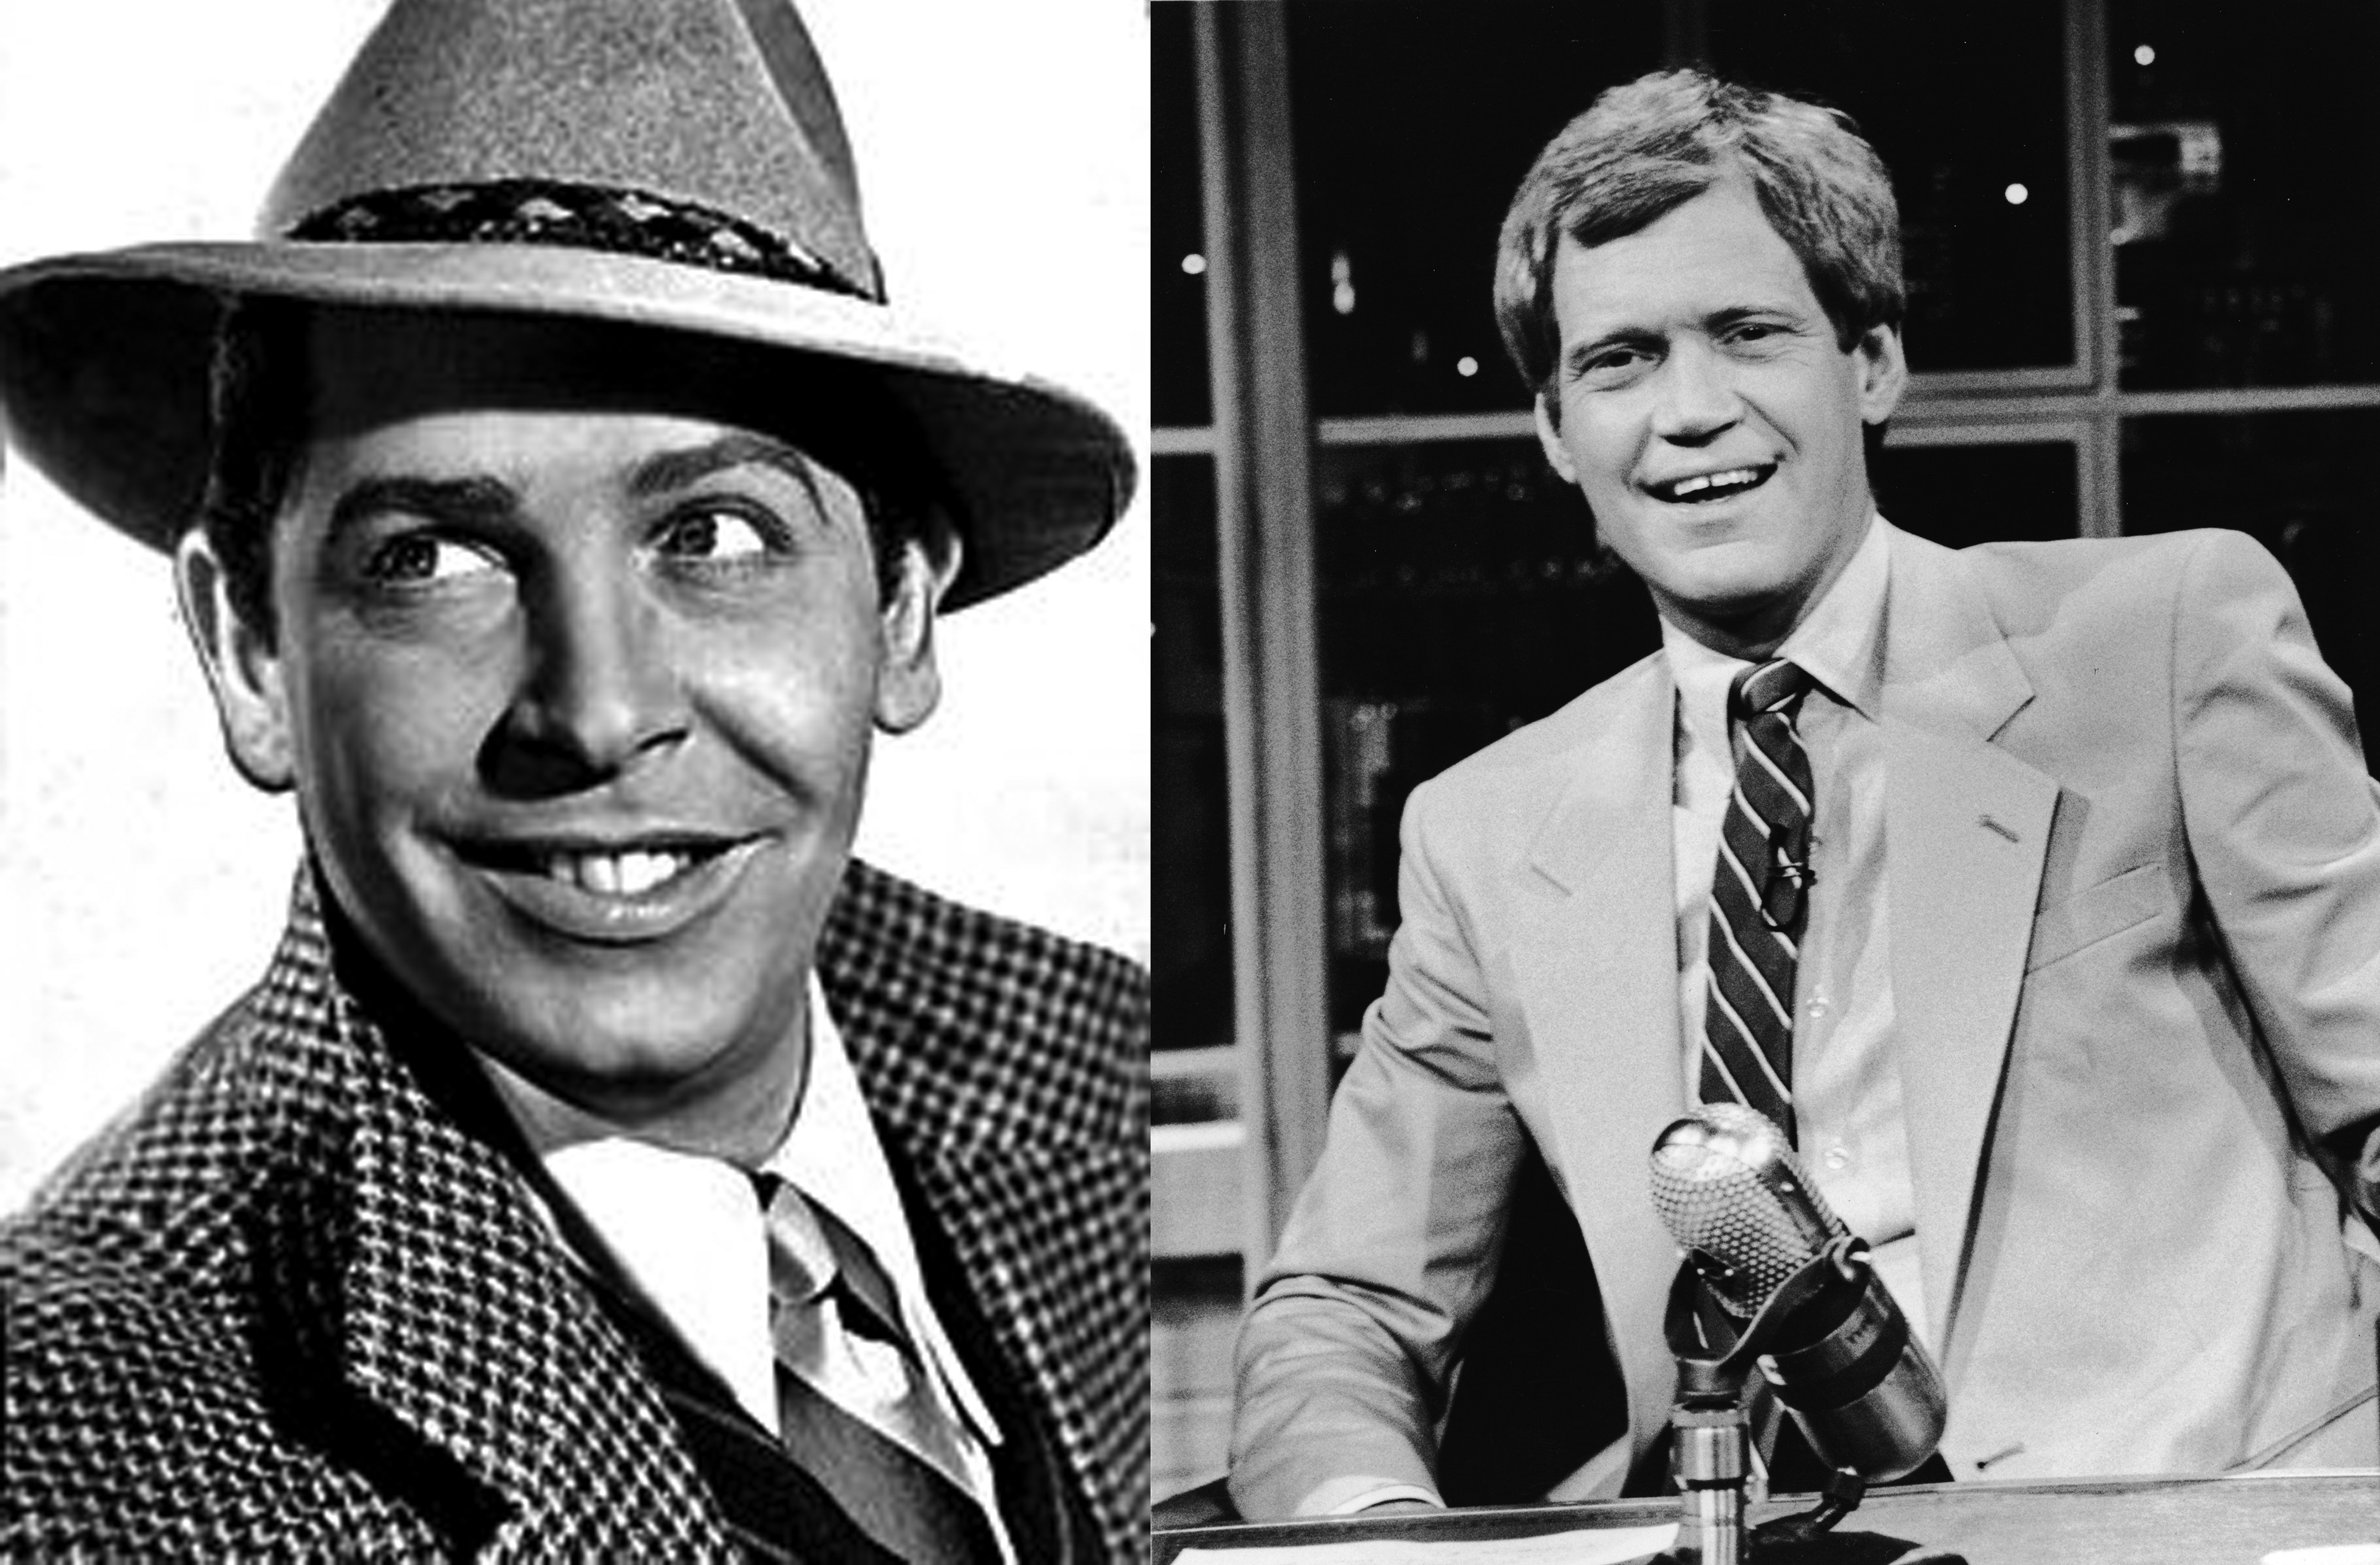 Image of a black and white photo of Milton Berle and a black and white photo of David Letterman side by side. 